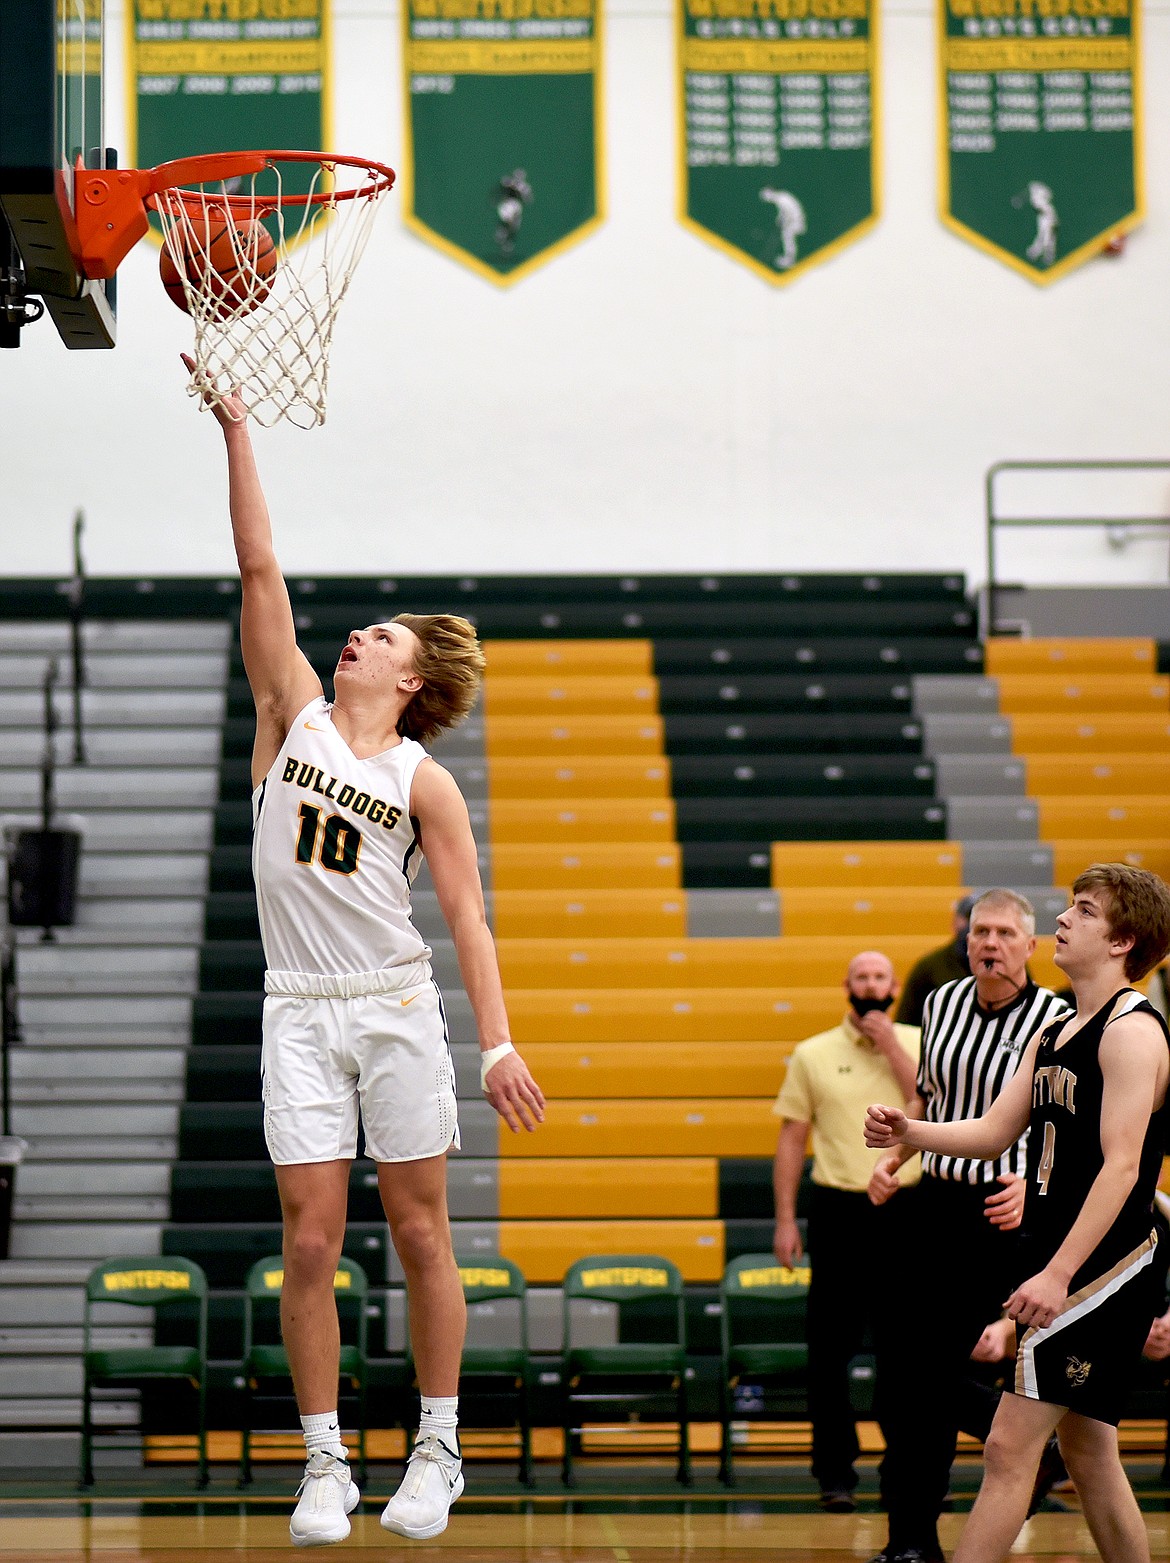 Bulldog Jaxsen Schlauch gets a steal and a fastbreak bucket against Stevensville on Friday. (Whitney England/Whitefish Pilot)